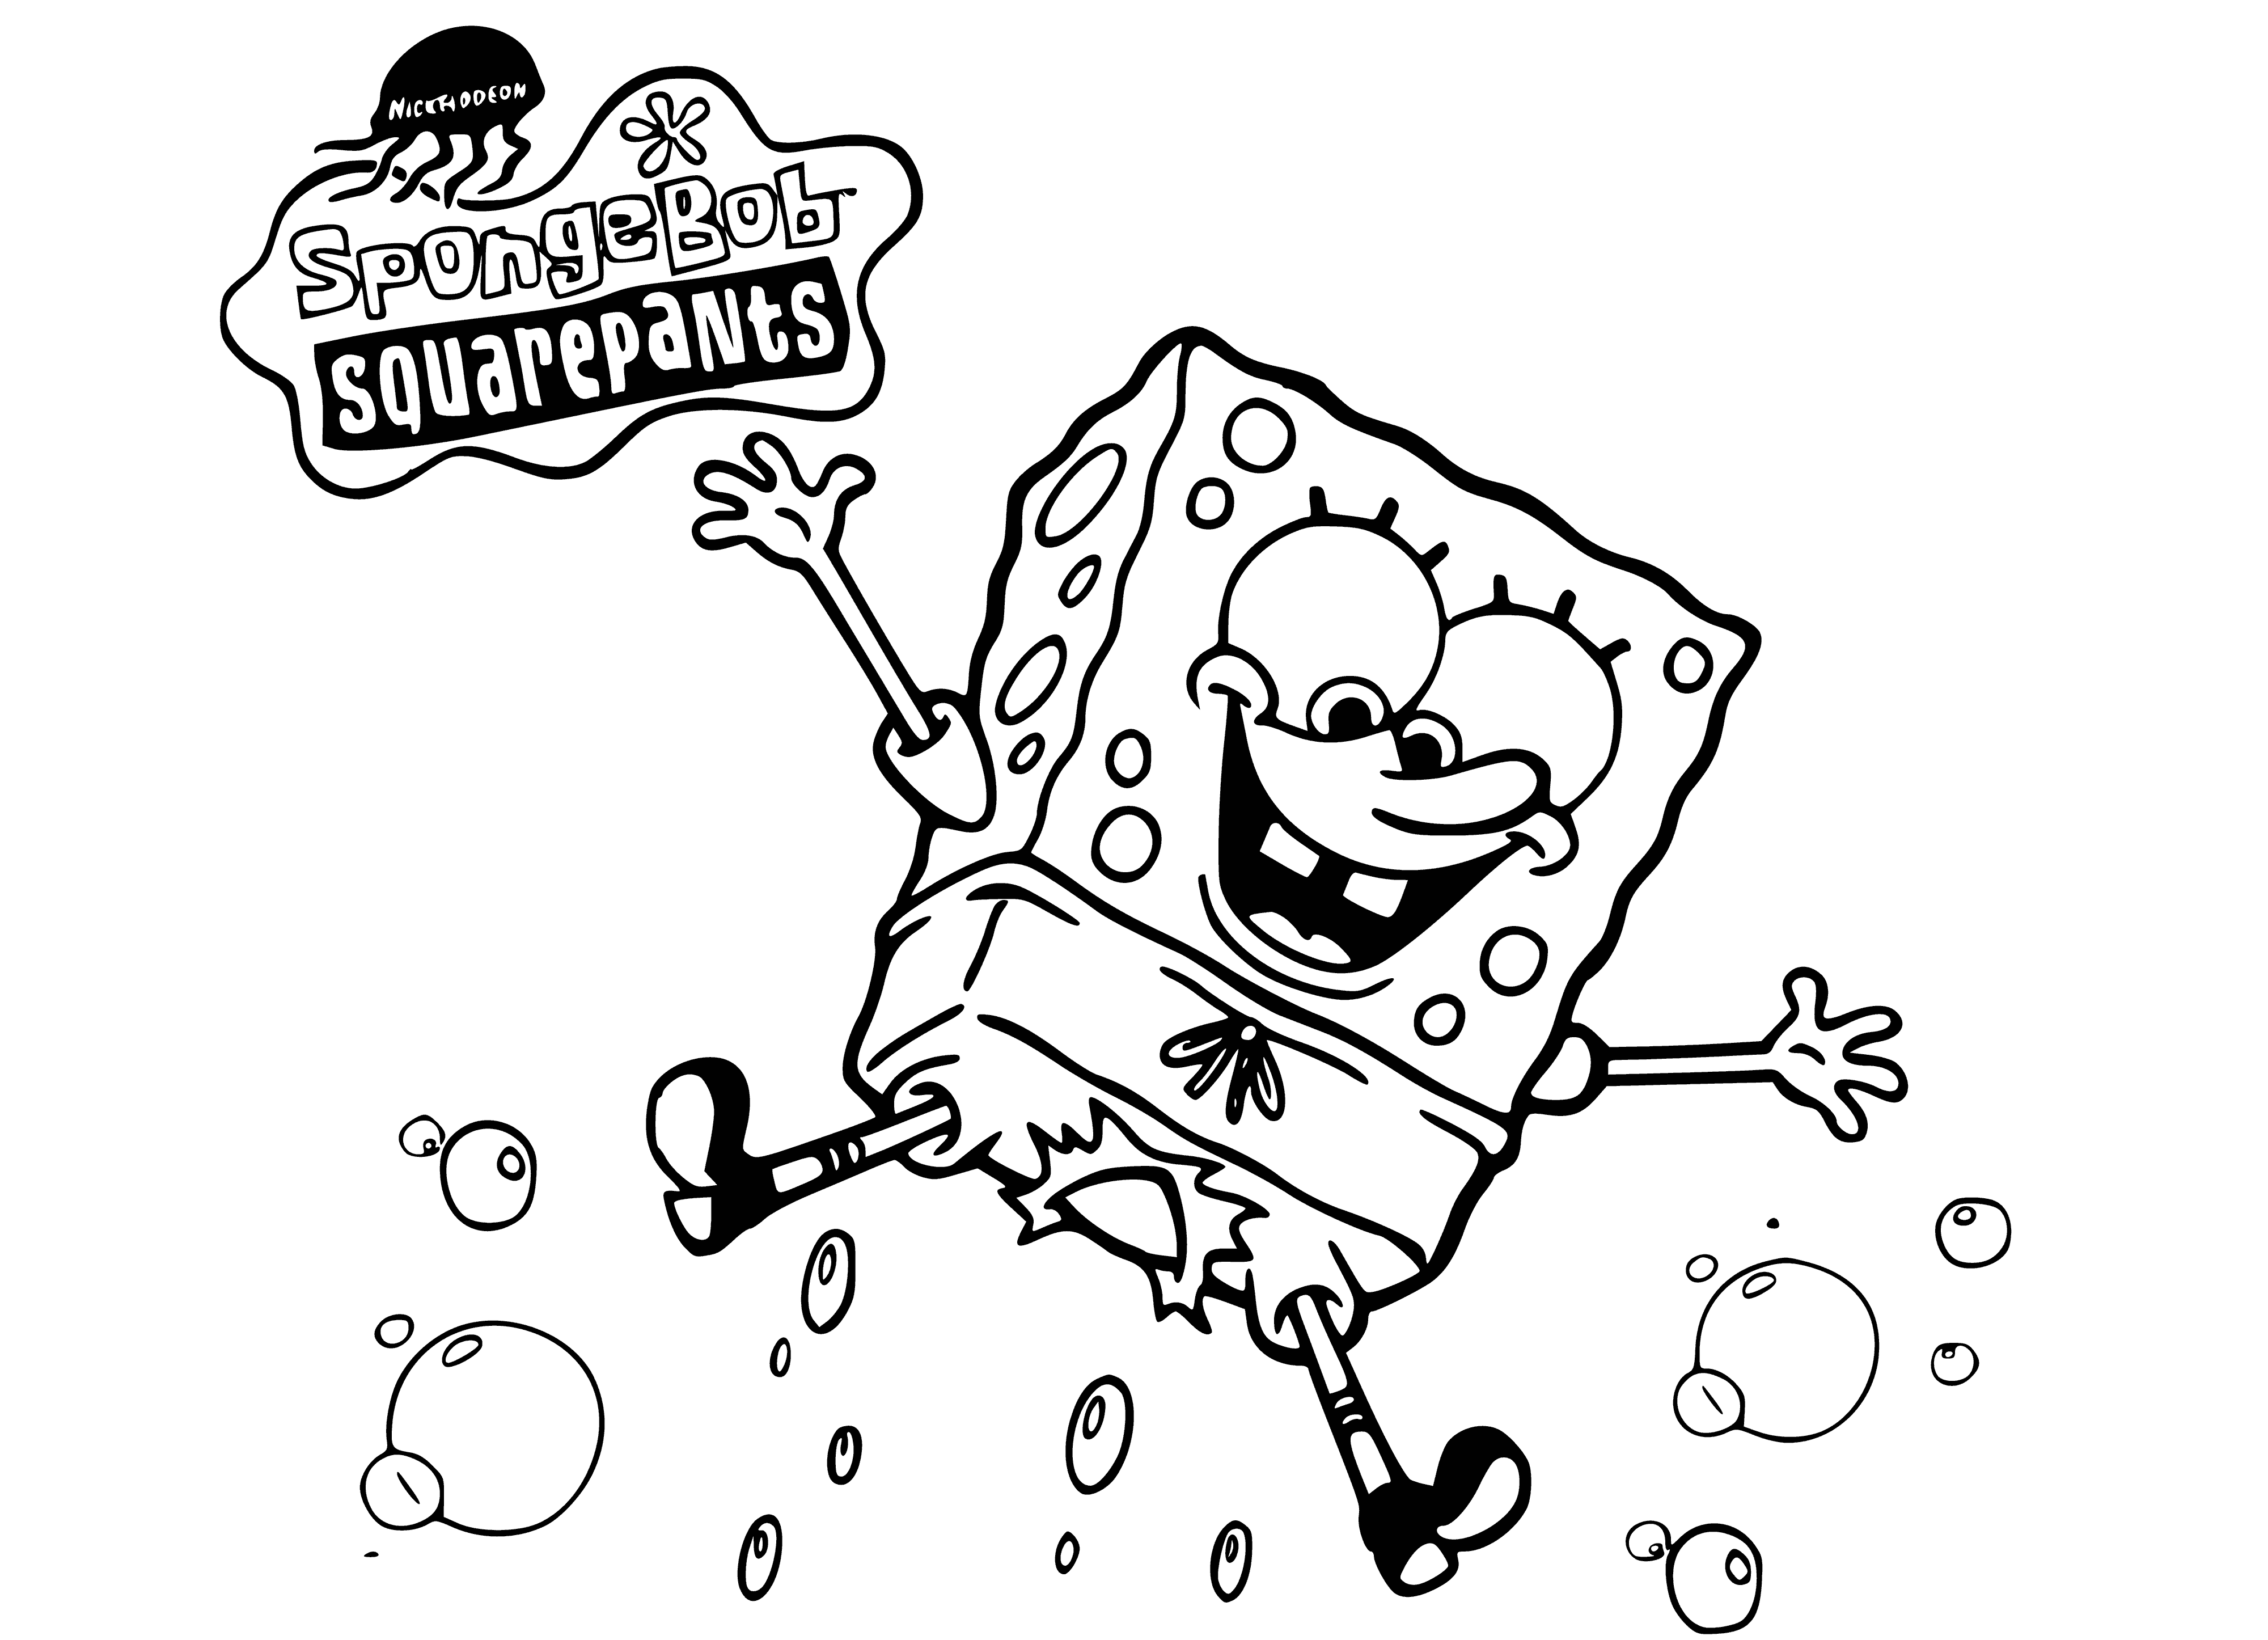 coloring page: Friendly SpongeBob loves adventures with friends in his pineapple home under the sea.